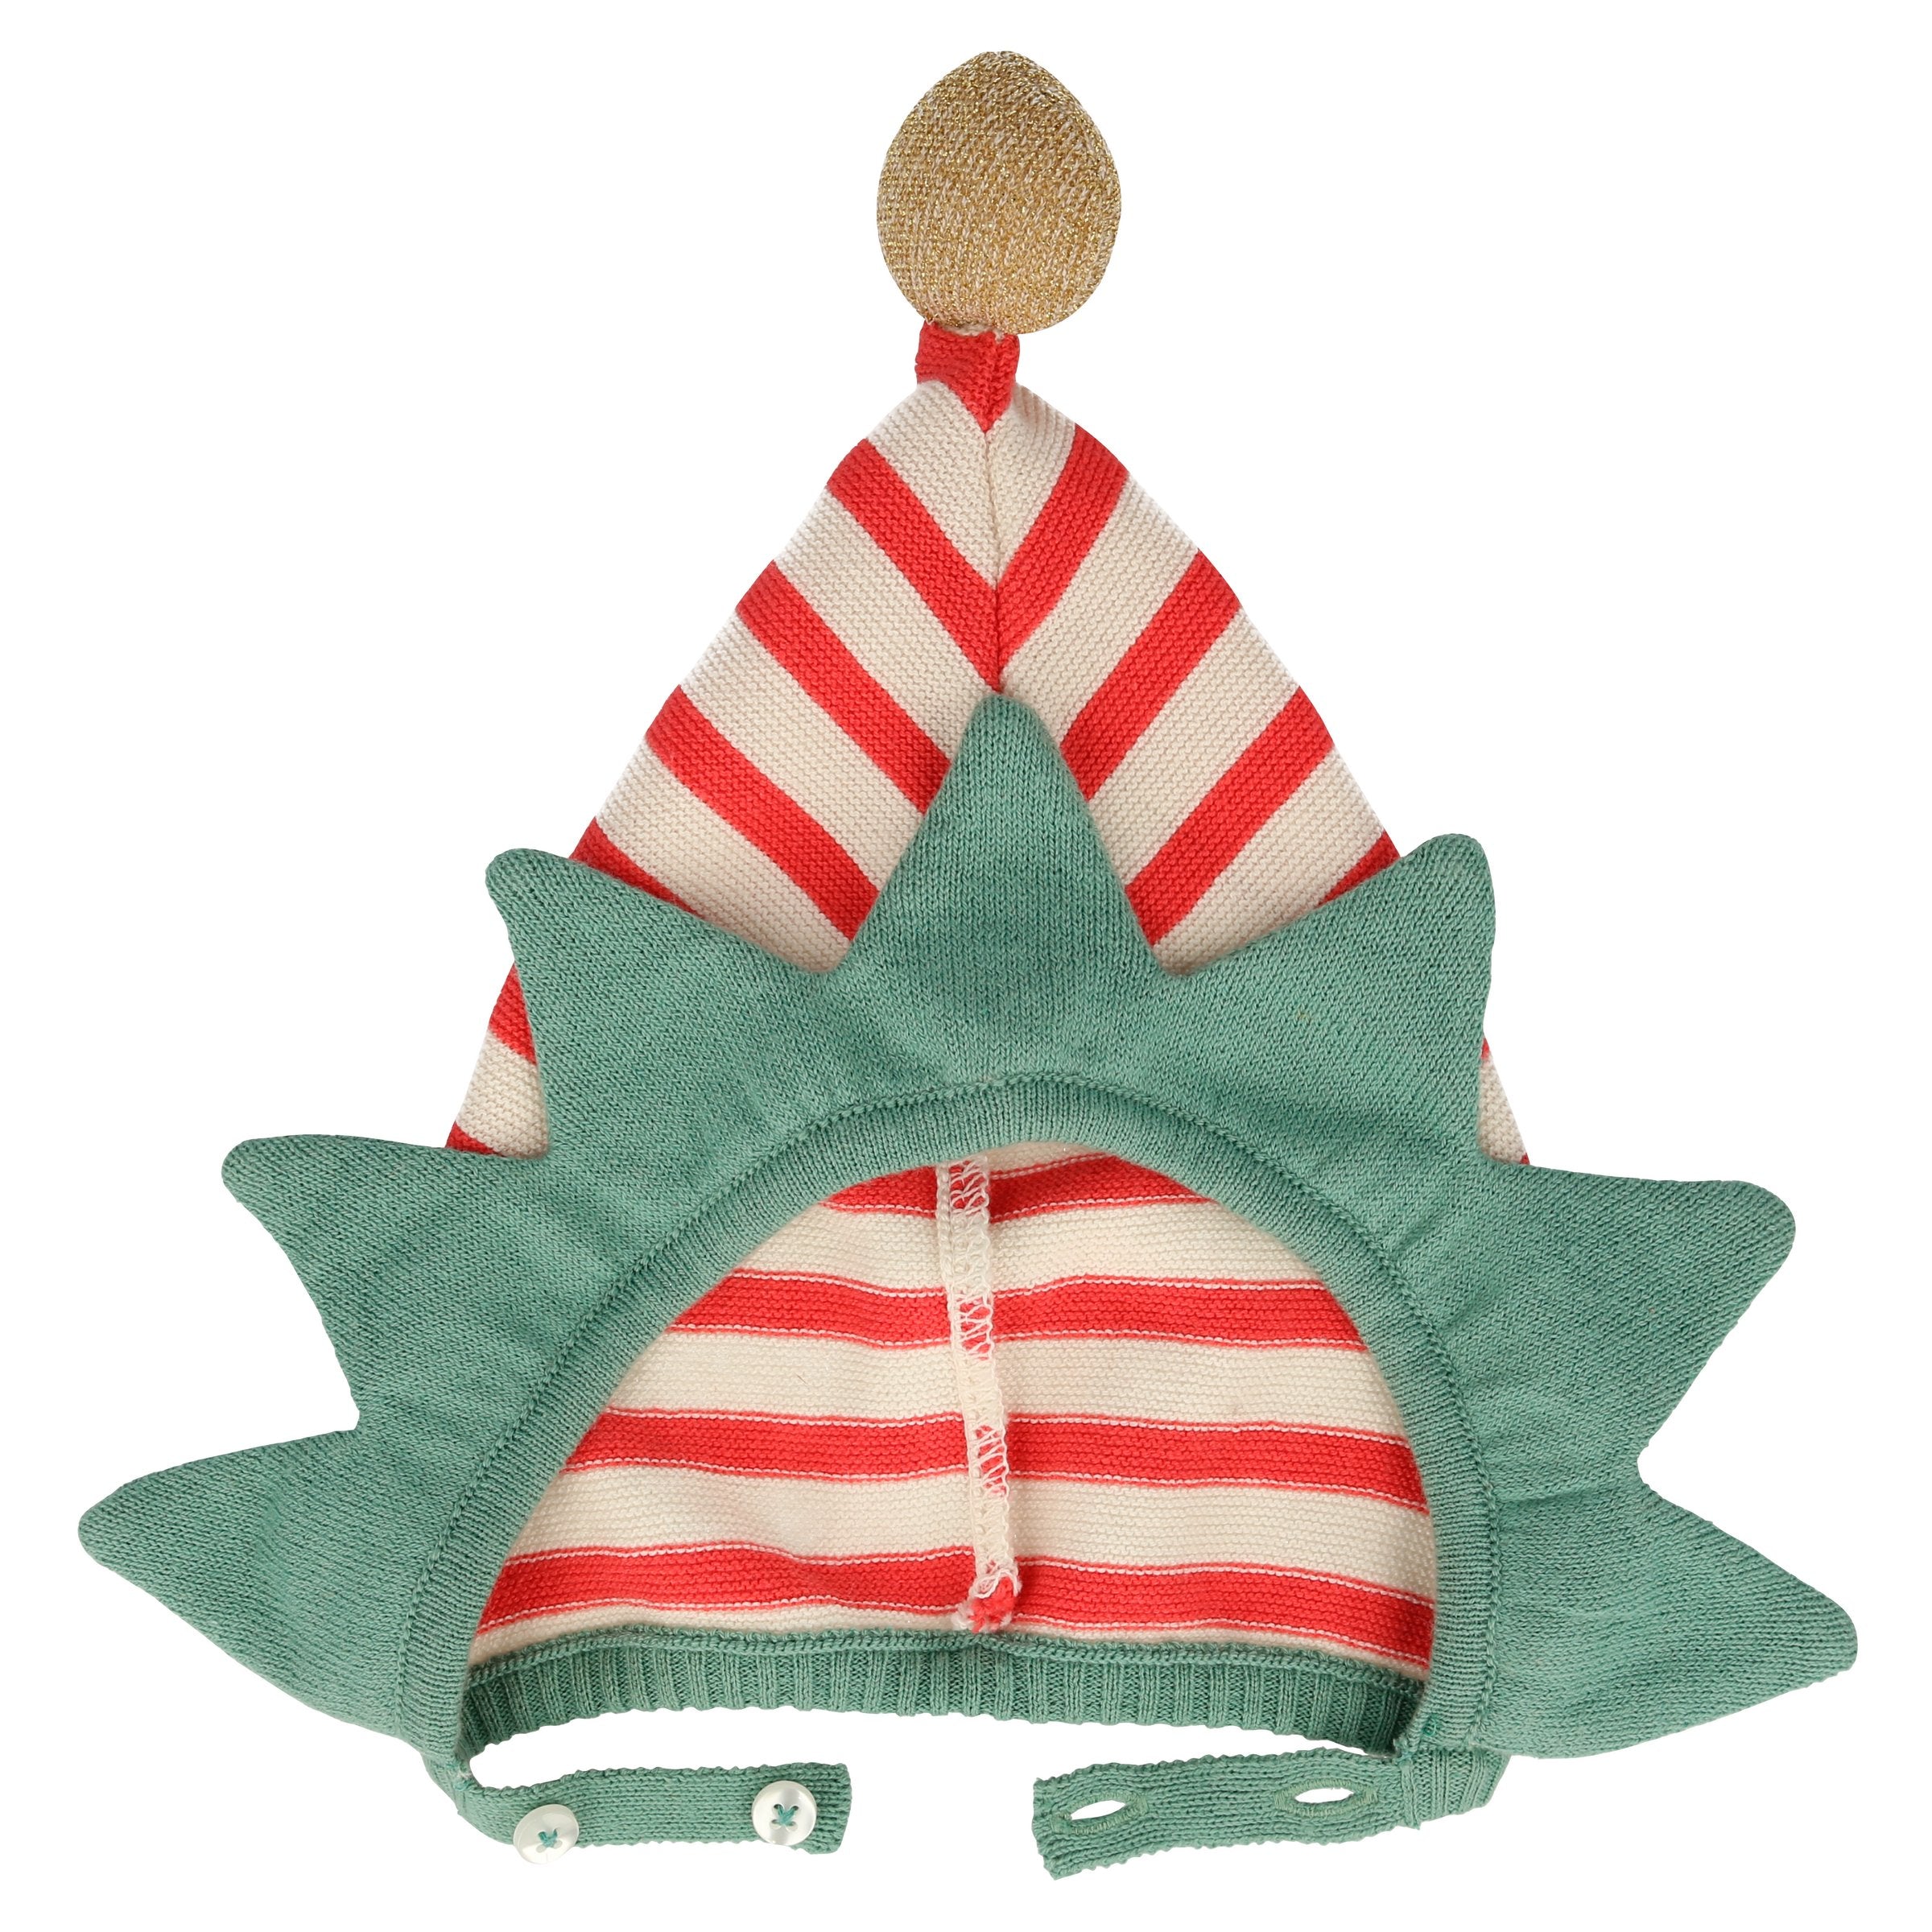 This organic cotton baby bonnet, with elf ears, is perfect as a baby Xmas outfit.